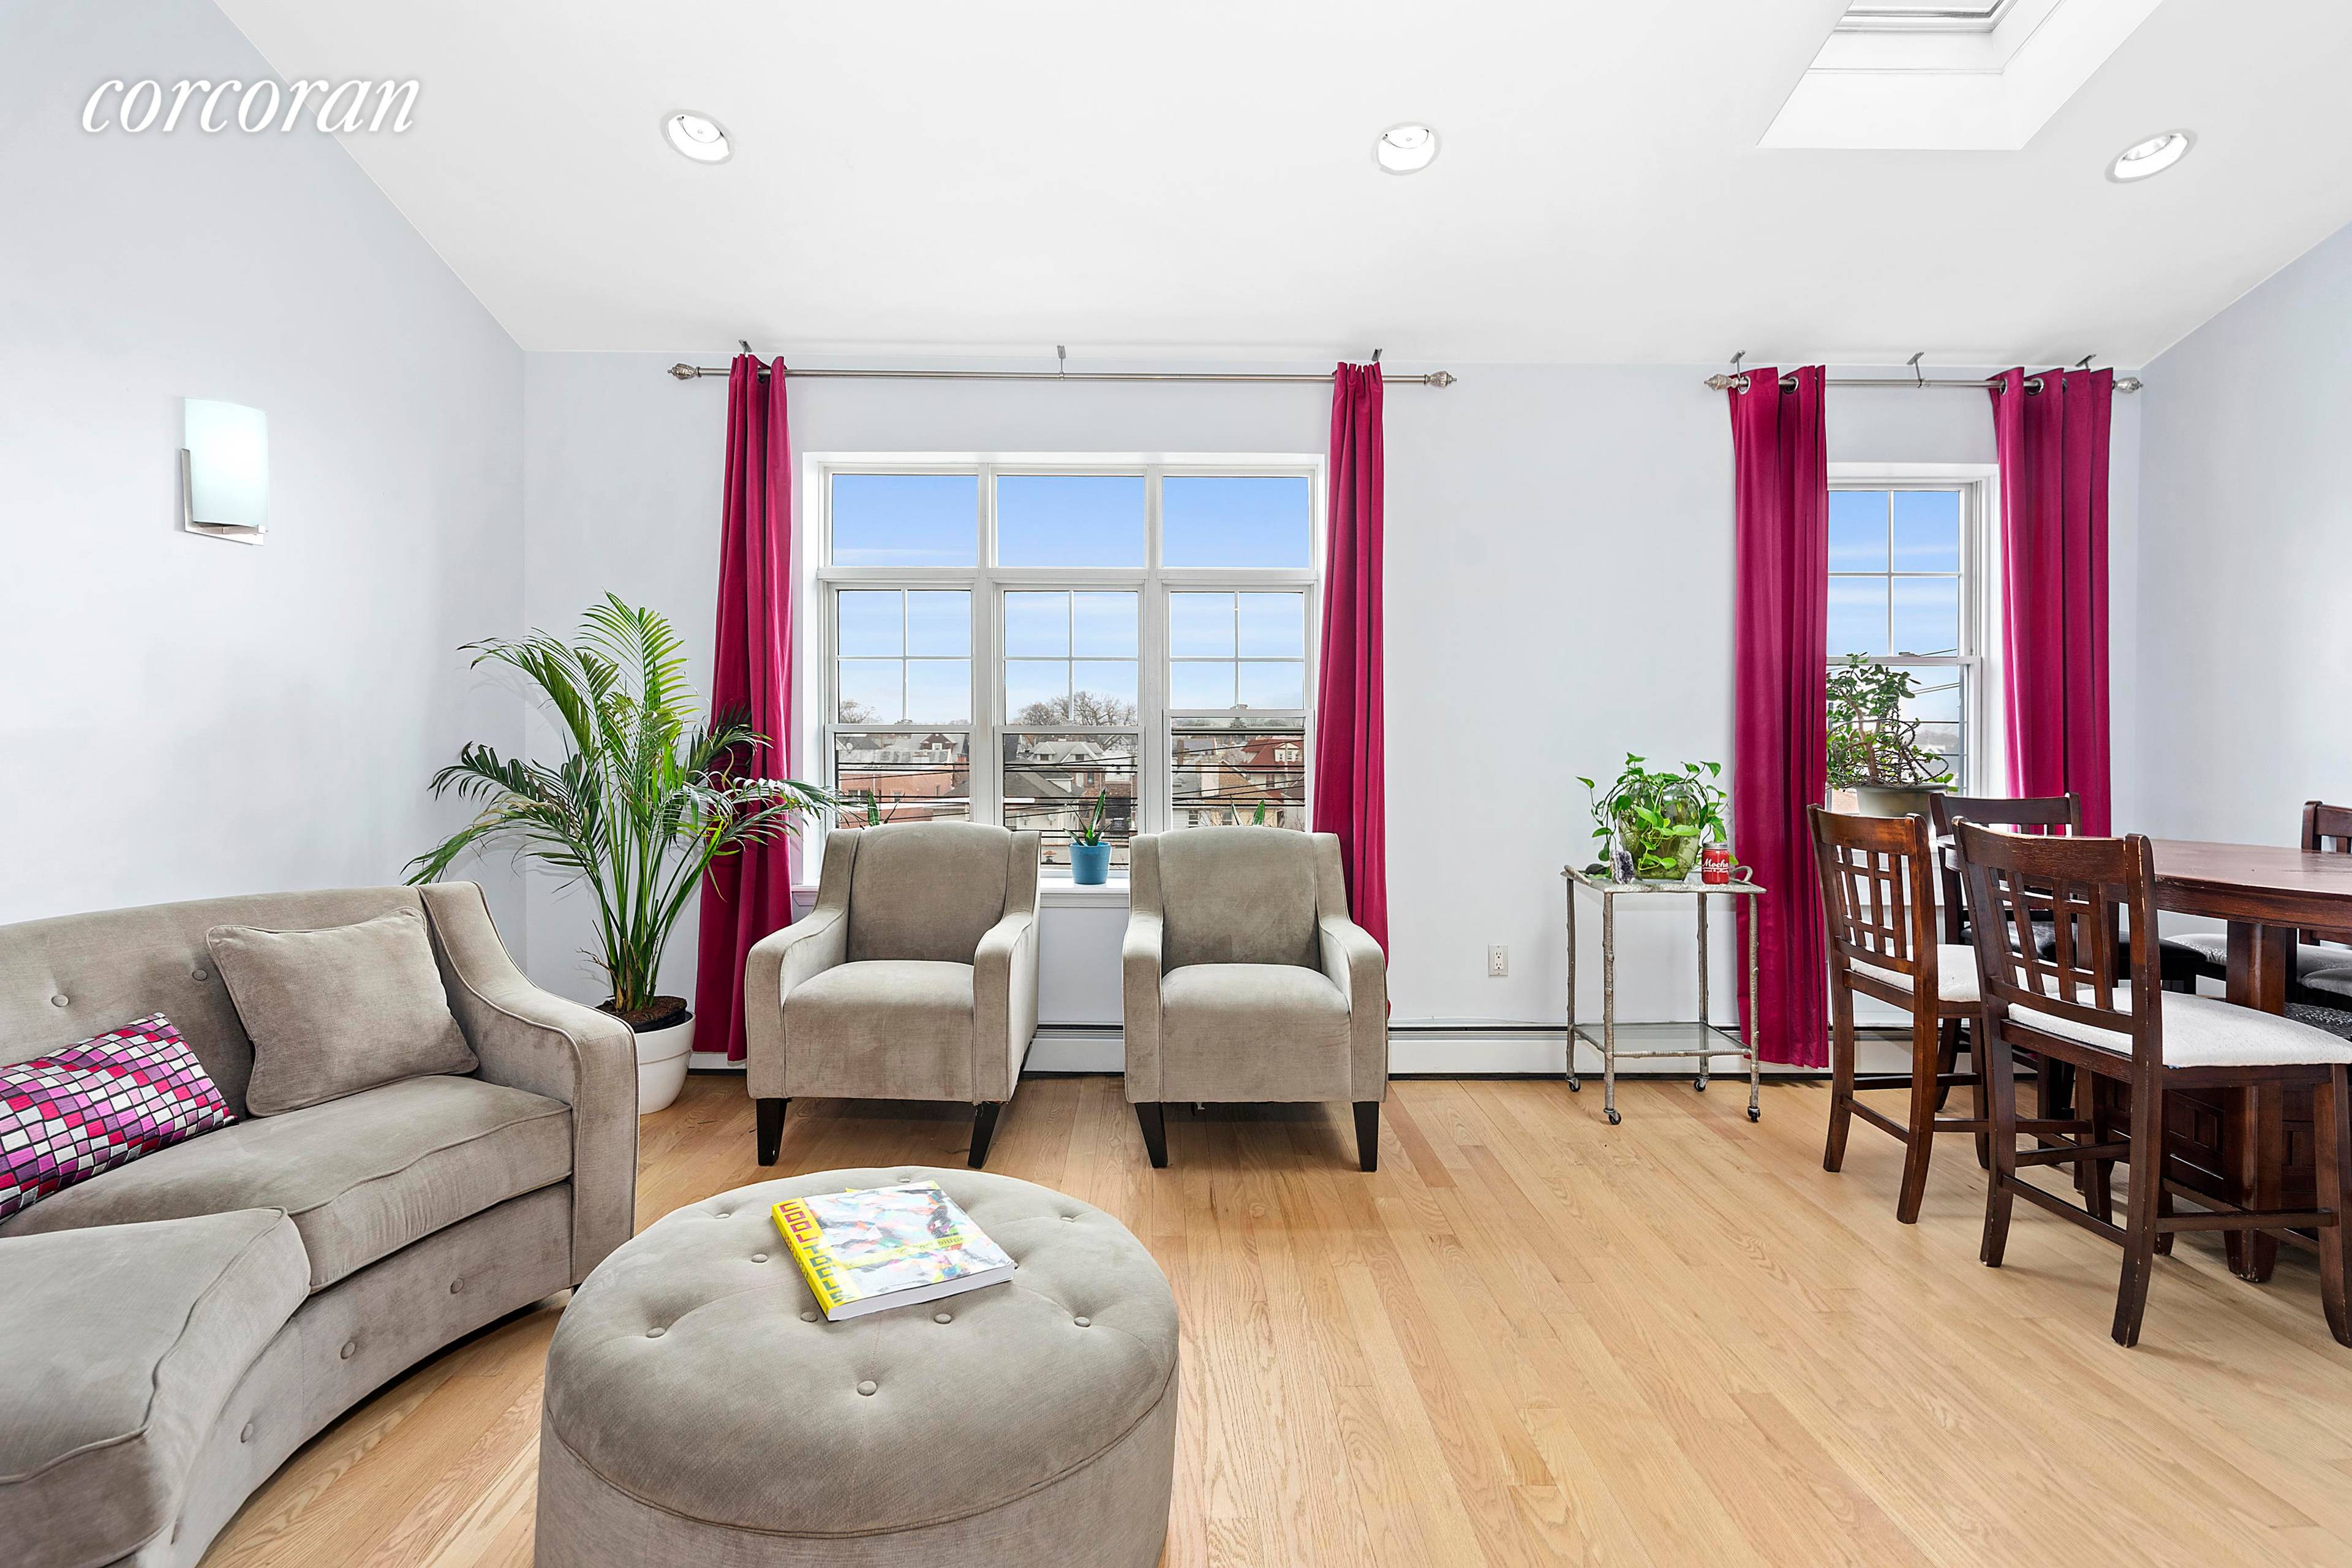 SUBMIT ALL OFFERS Welcome to 998 East 35th Street 4A This oversized 3BR 3BA penthouse duplex spans over 2 floors totaling over 1, 600 square feet of usable space.